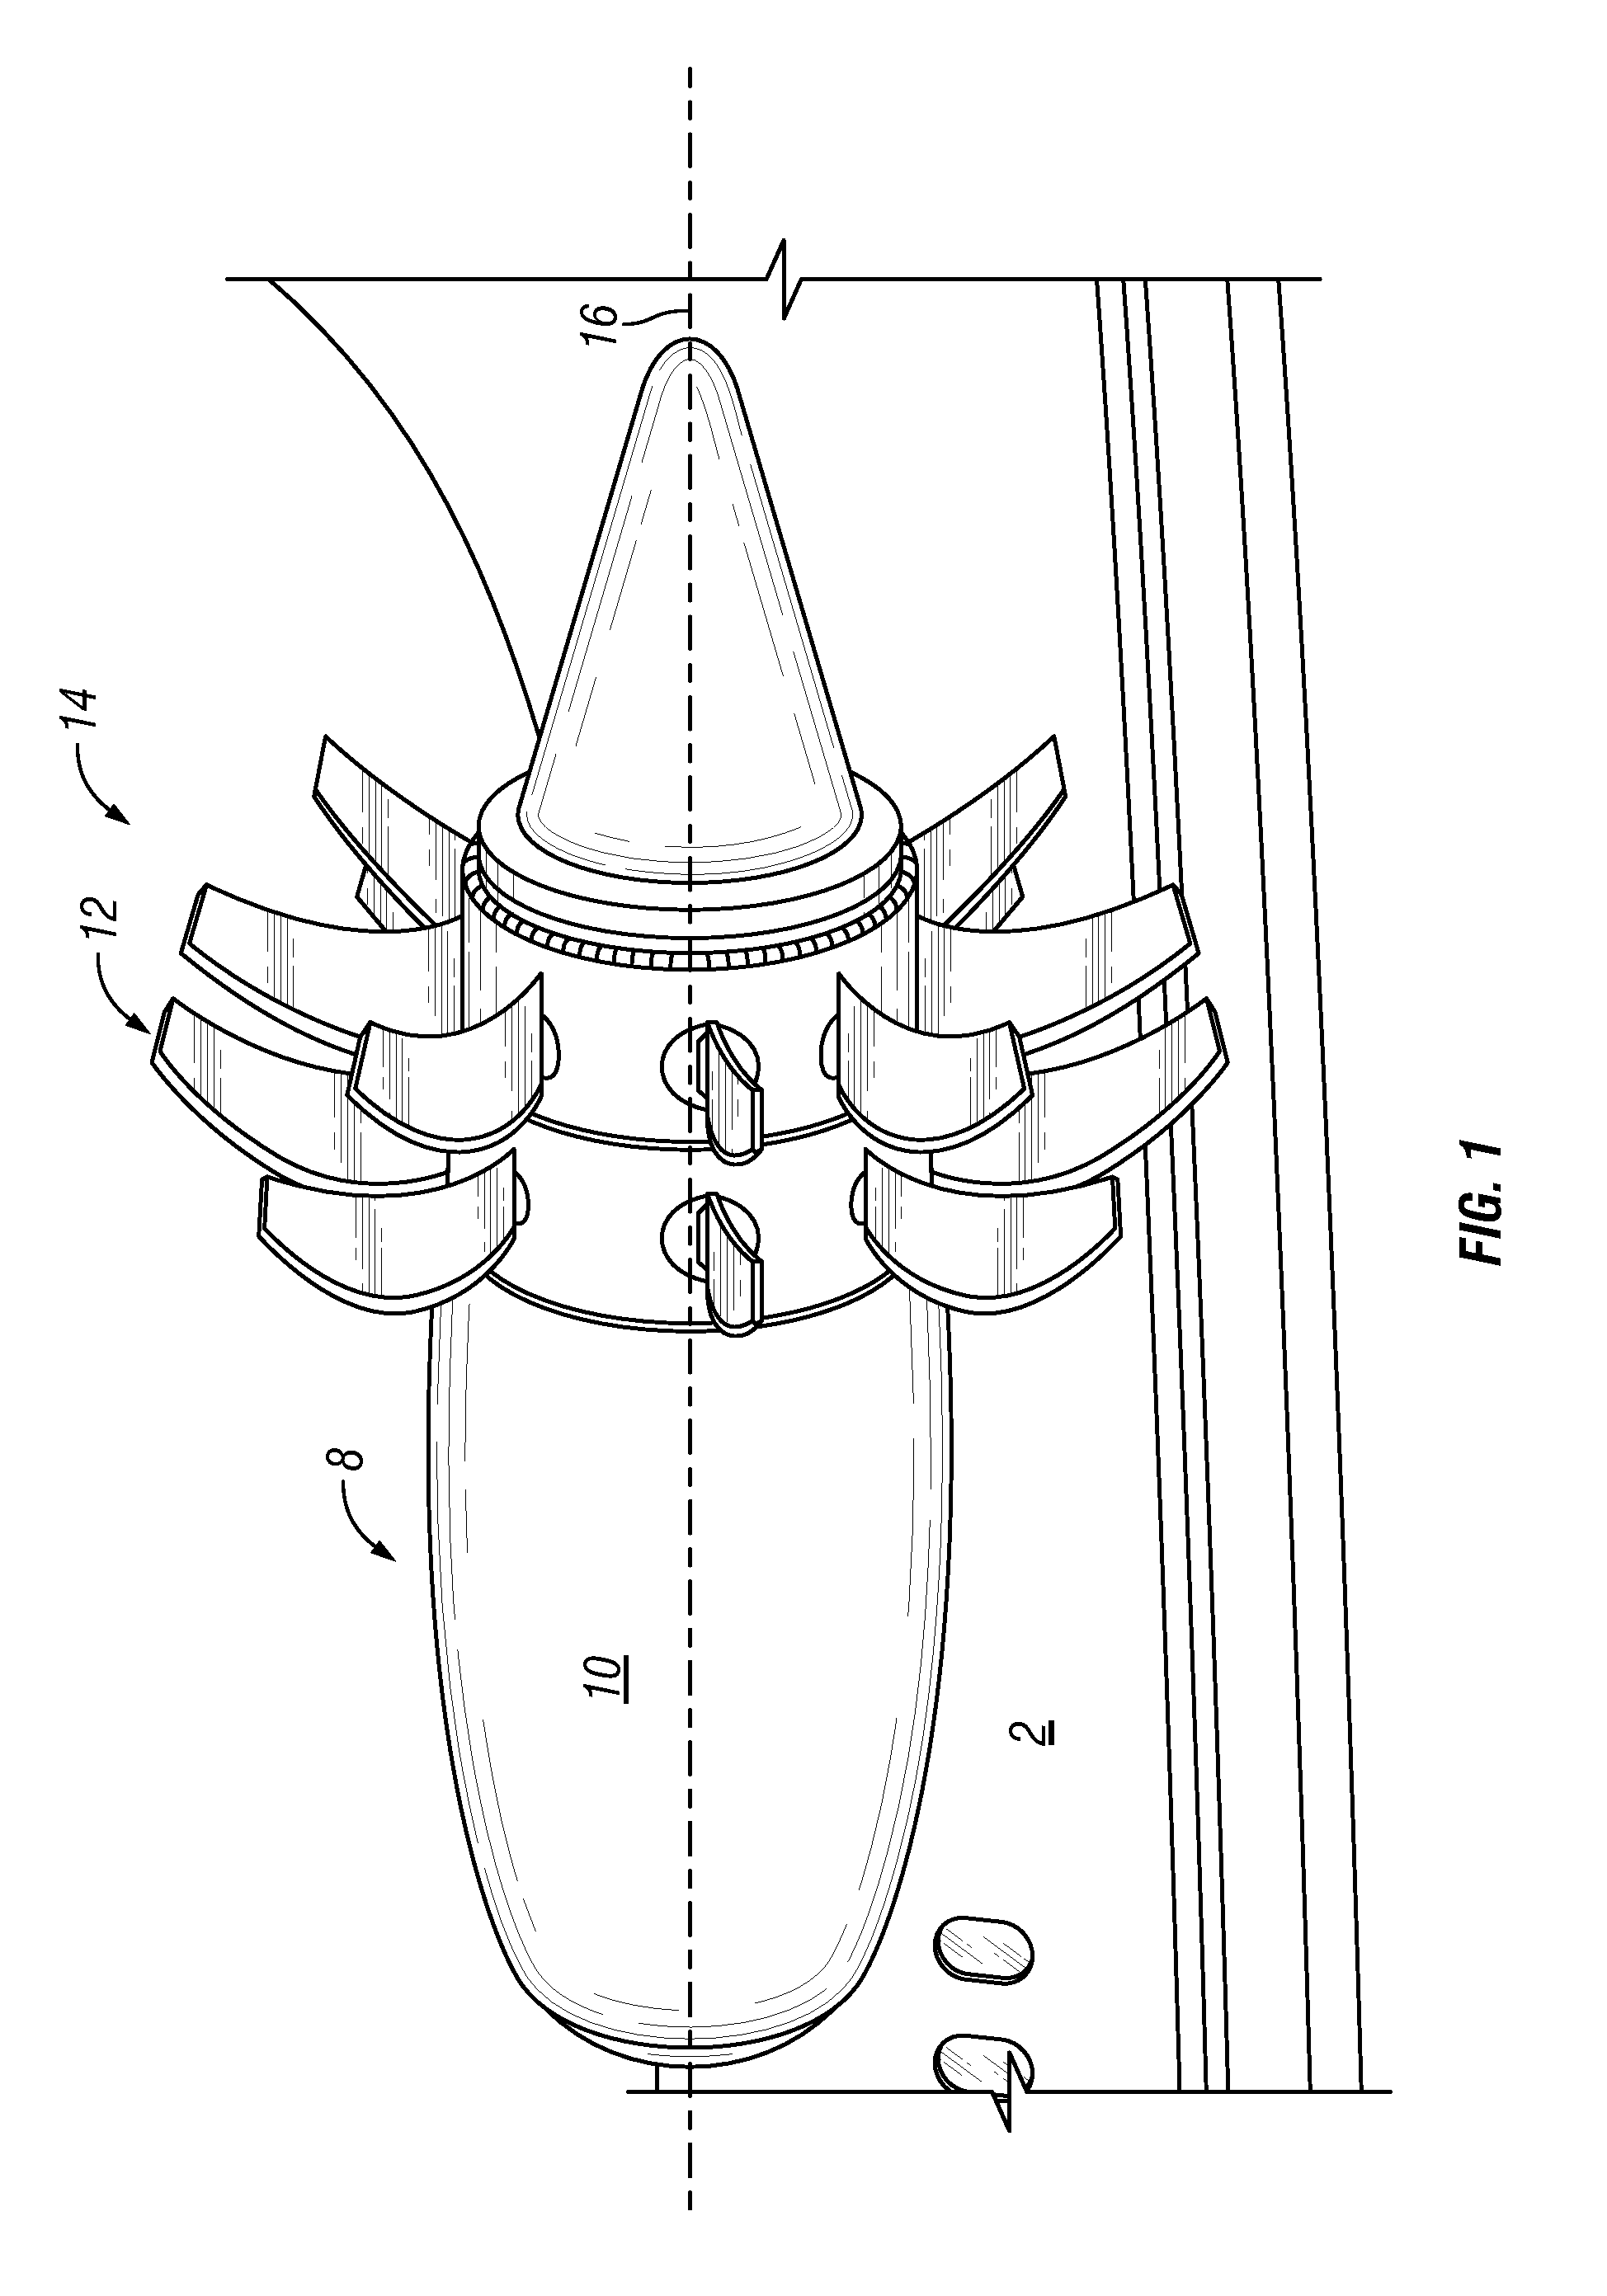 Electrical power generation apparatus for contra-rotating open-rotor aircraft propulsion system